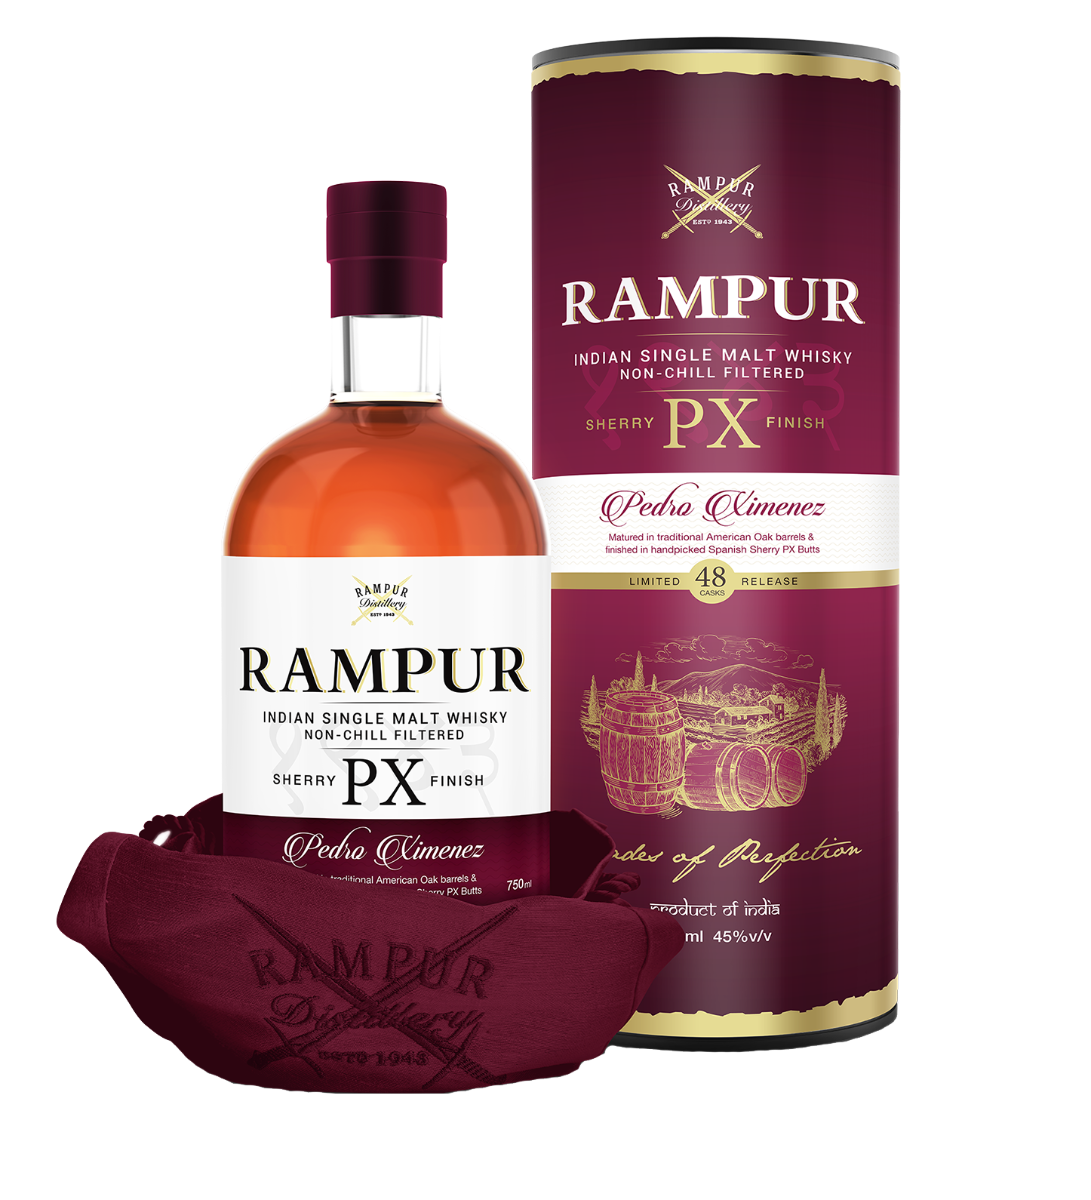 RAMPUR WHISKEY SINGLE MALT SHERRY PX FINISH LIMITED 48 CASK RELEASE INDIA 750ML - Remedy Liquor